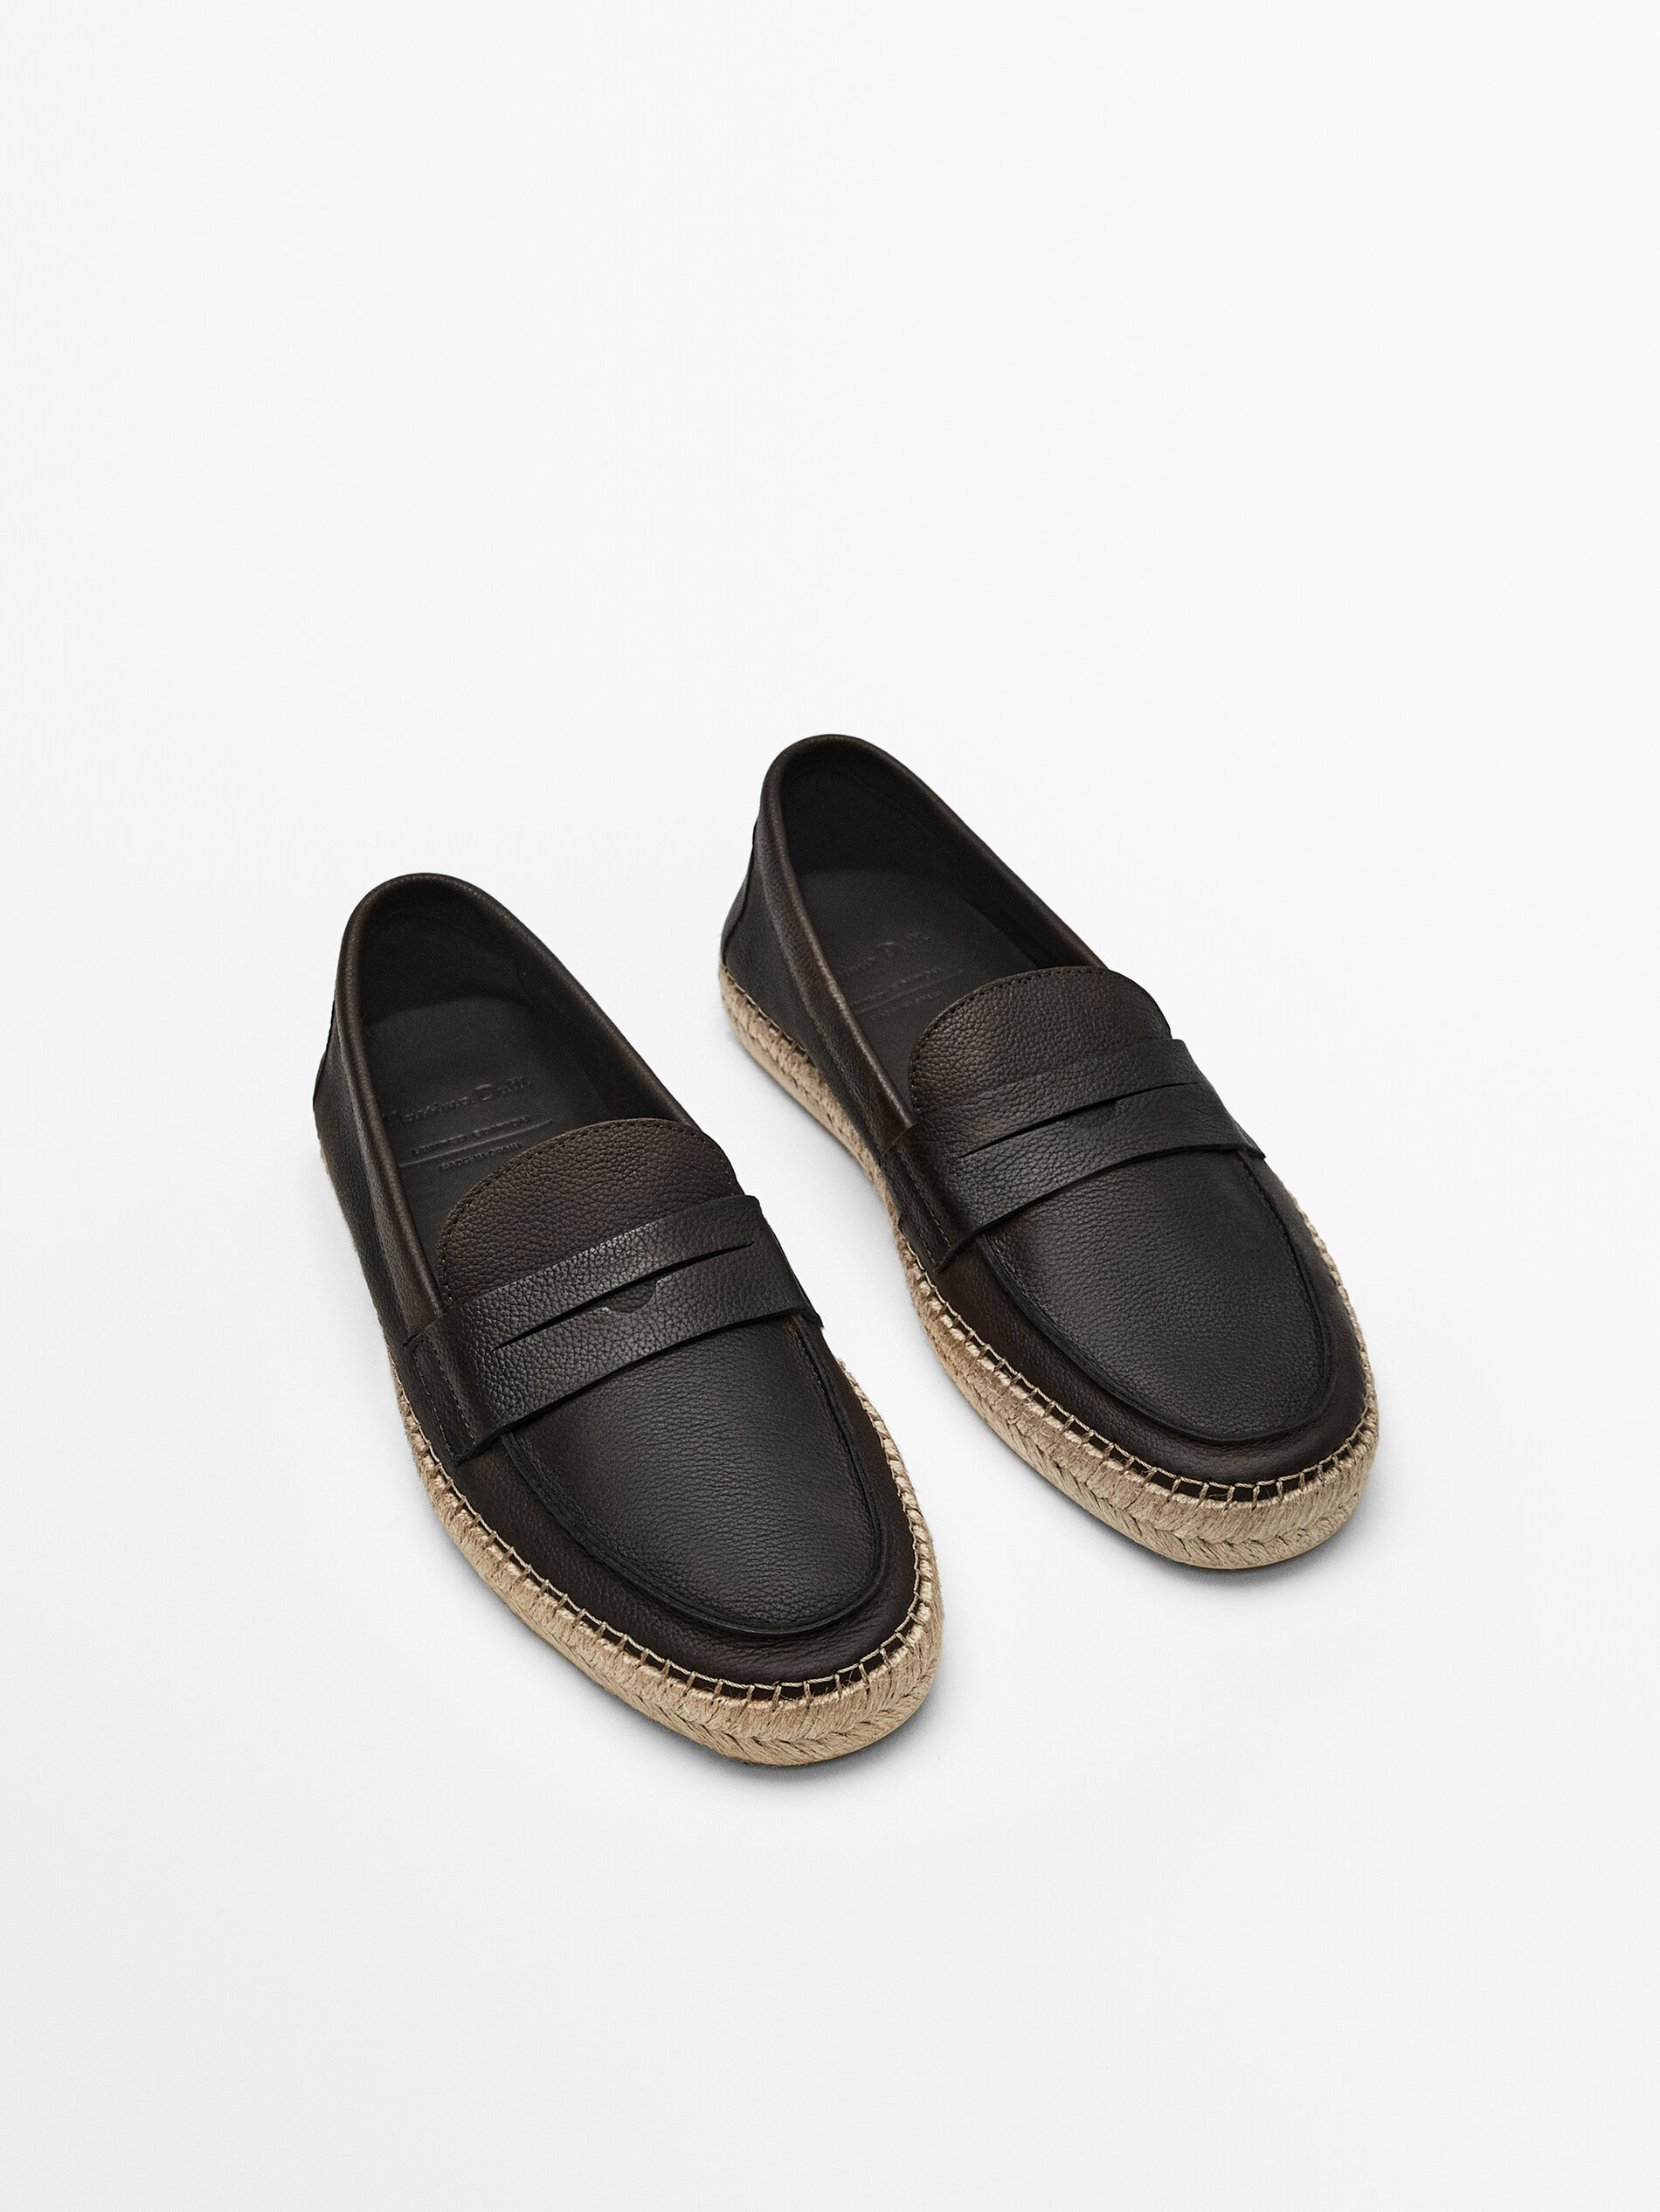 LEATHER ESPADRILLES - LIMITED EDITION